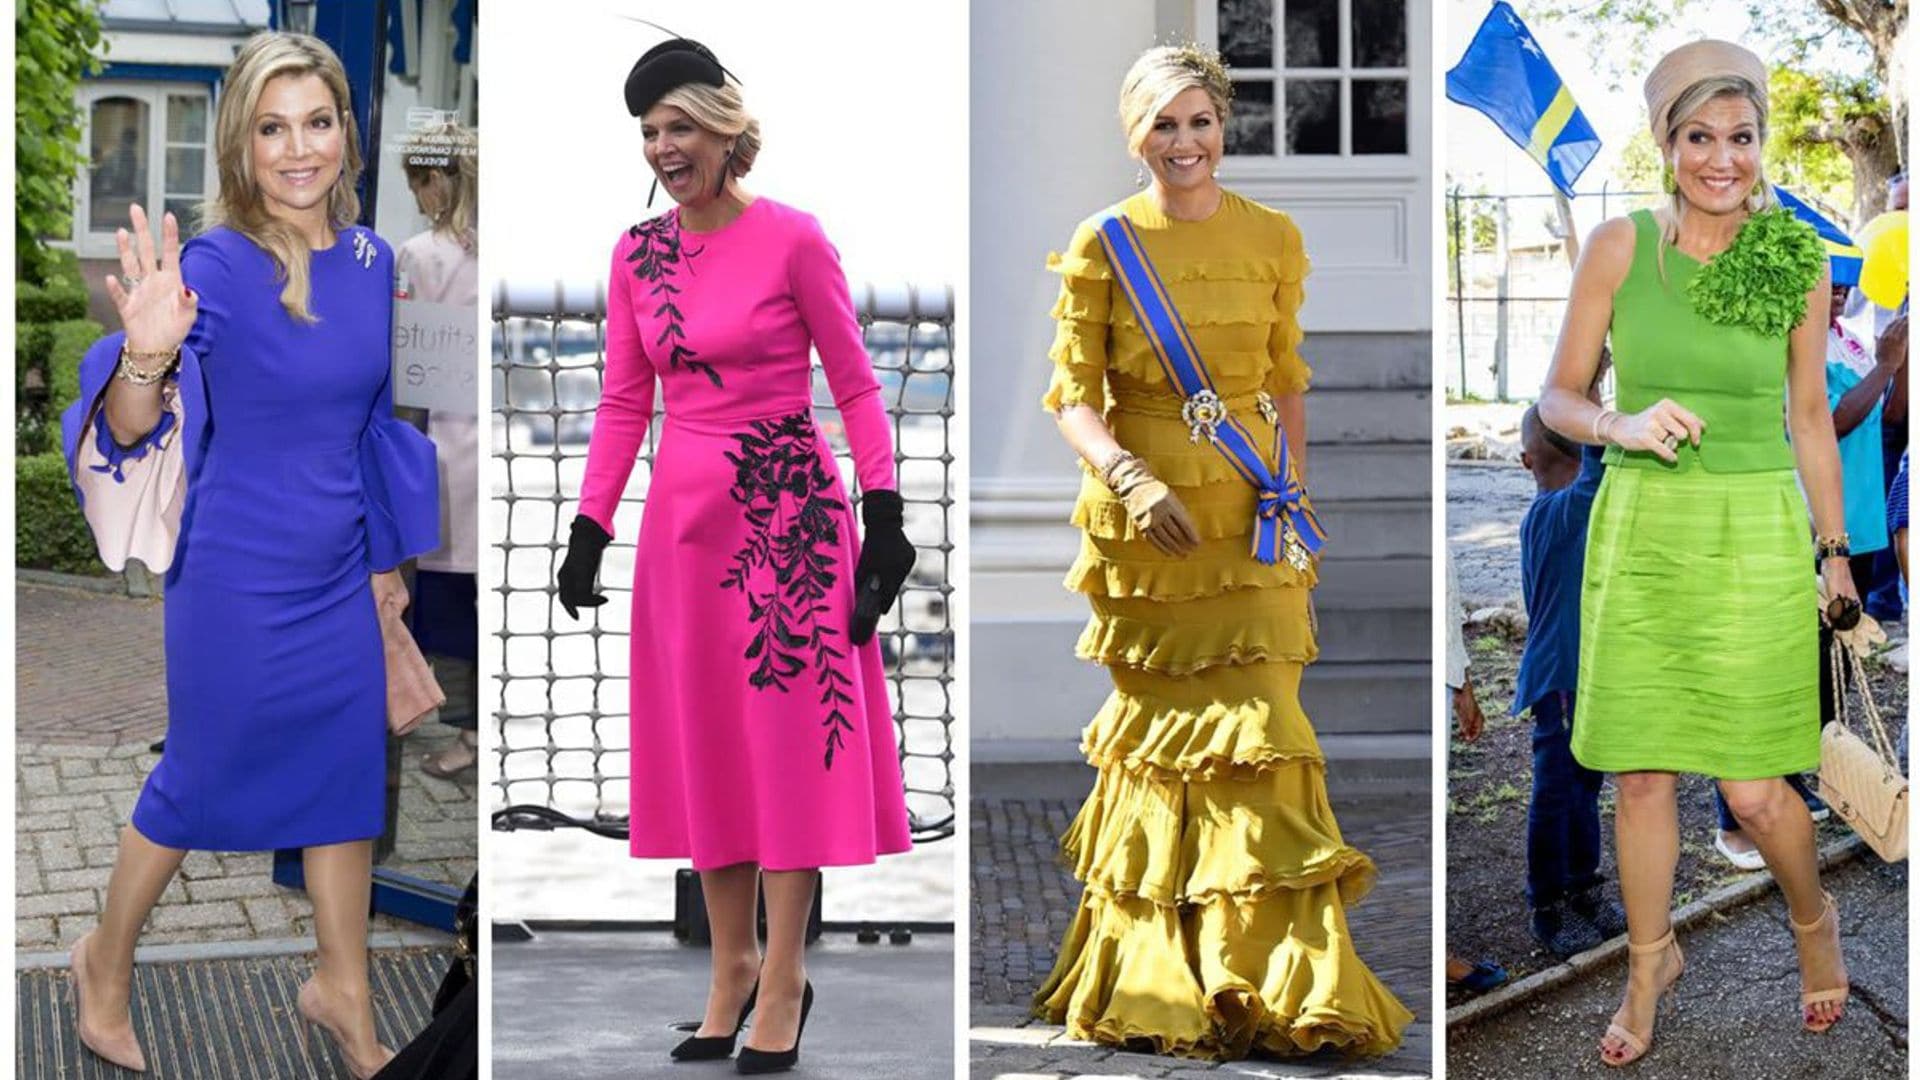 50 Fashionable years: the bold and colorful fashion of Queen Maxima [Photos]